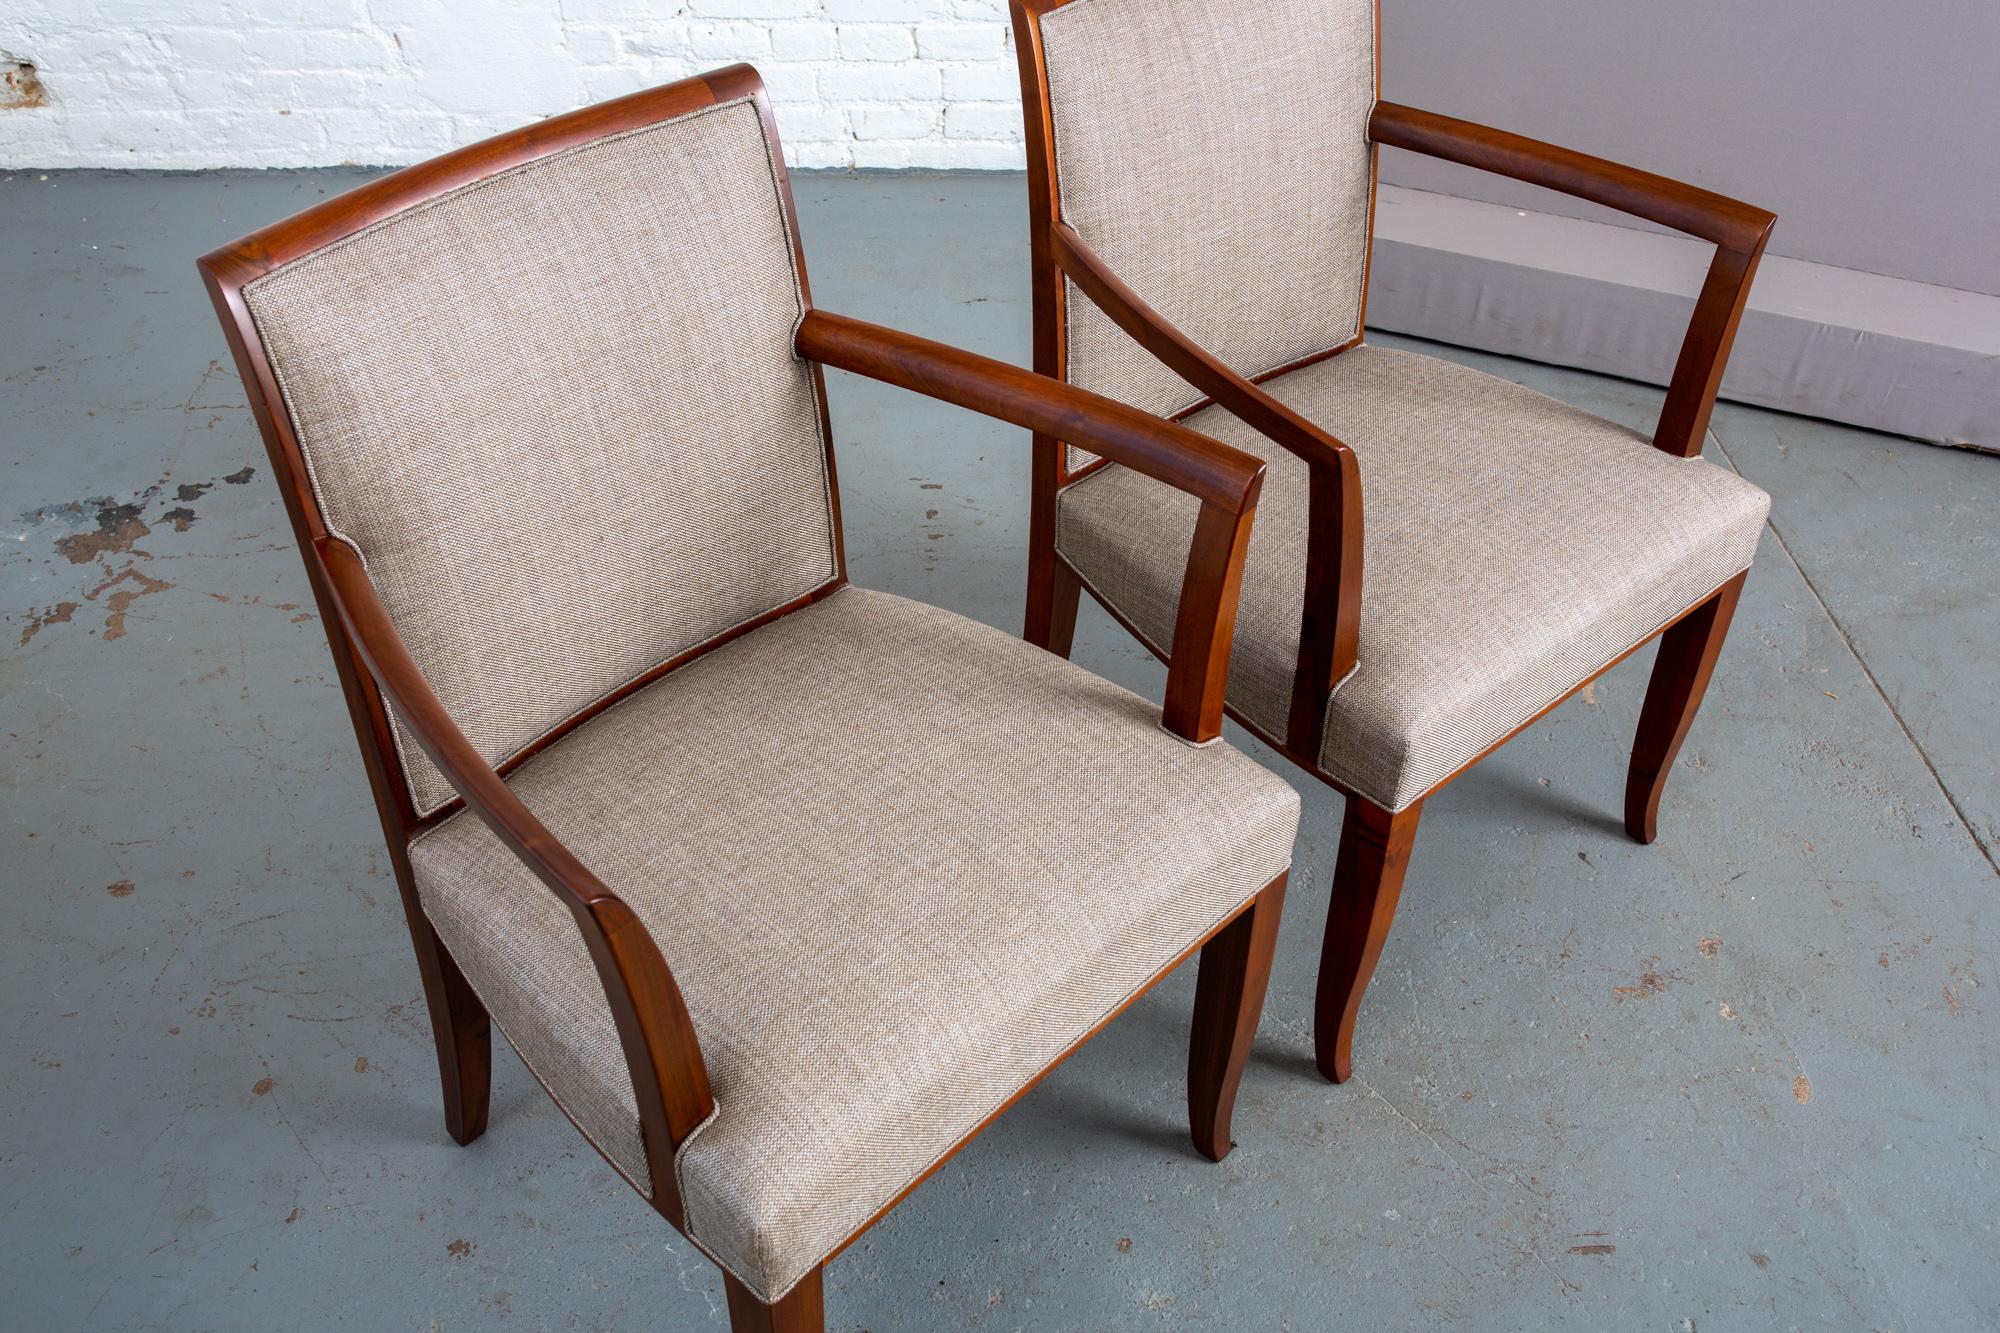 Pair of newly restored 1940s Art Deco style mahogany open armchairs. Beautiful gently curved and bent arms with small taper and curve to legs. Clean lines throughout.
Measures: Seat depth 18.5